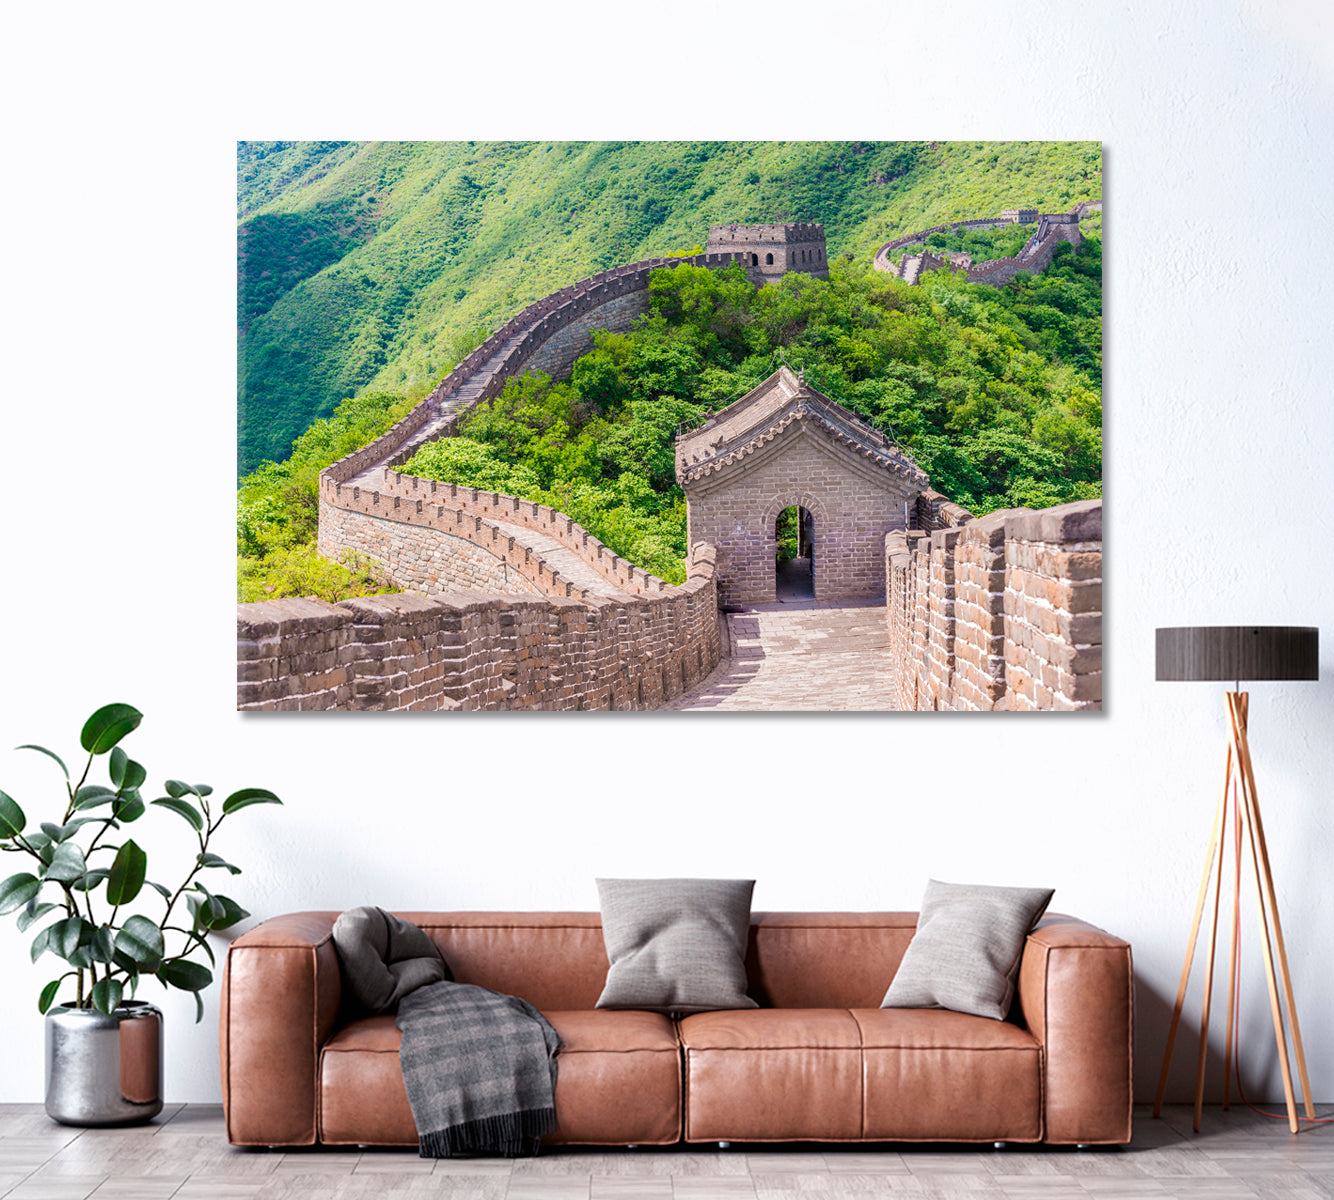 Mutianyu Great Wall of China Canvas Print ArtLexy 1 Panel 24"x16" inches 